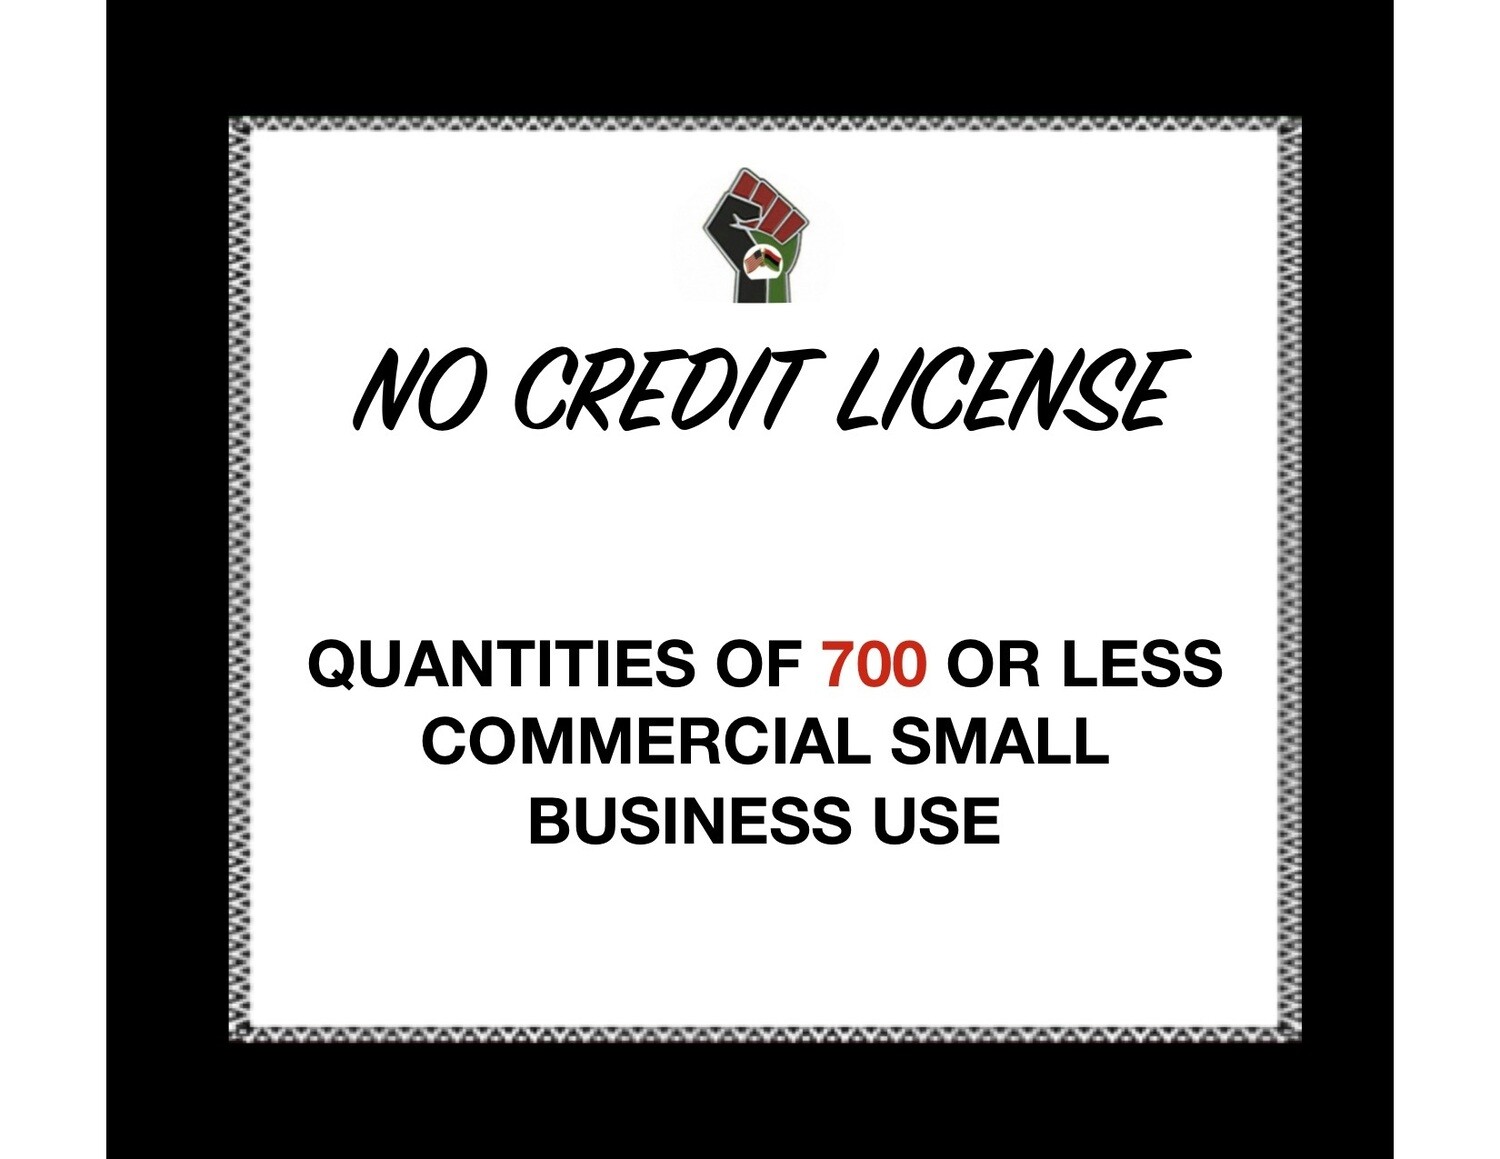 No Credit License for Quantities of 700 or Less (Commercial Use) for 1 Clipart or Digital Paper Set